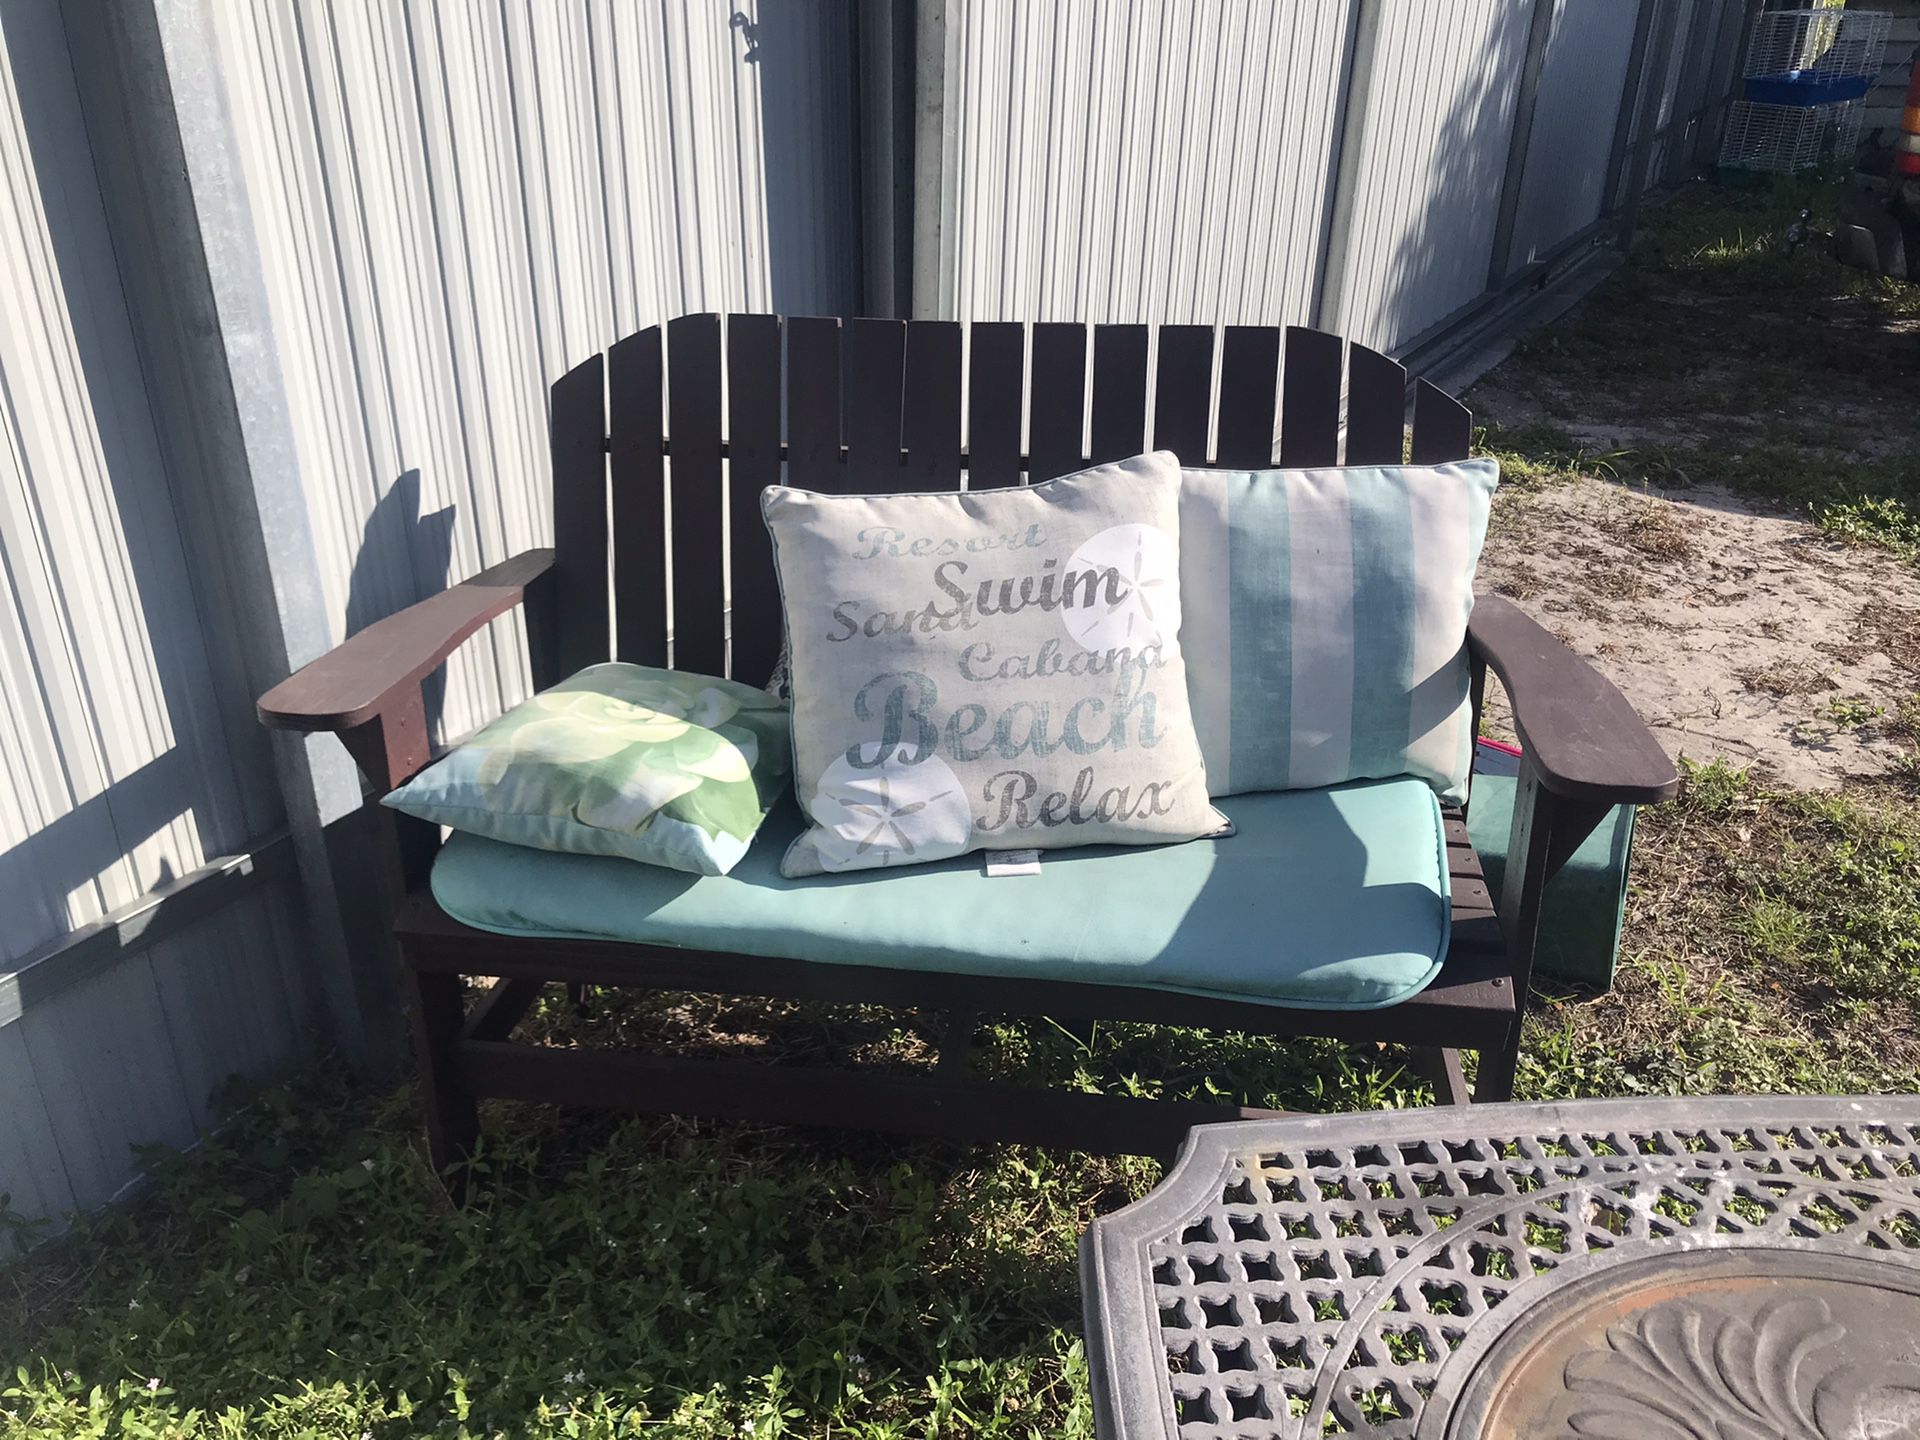 Patio or front porch furniture with cushions